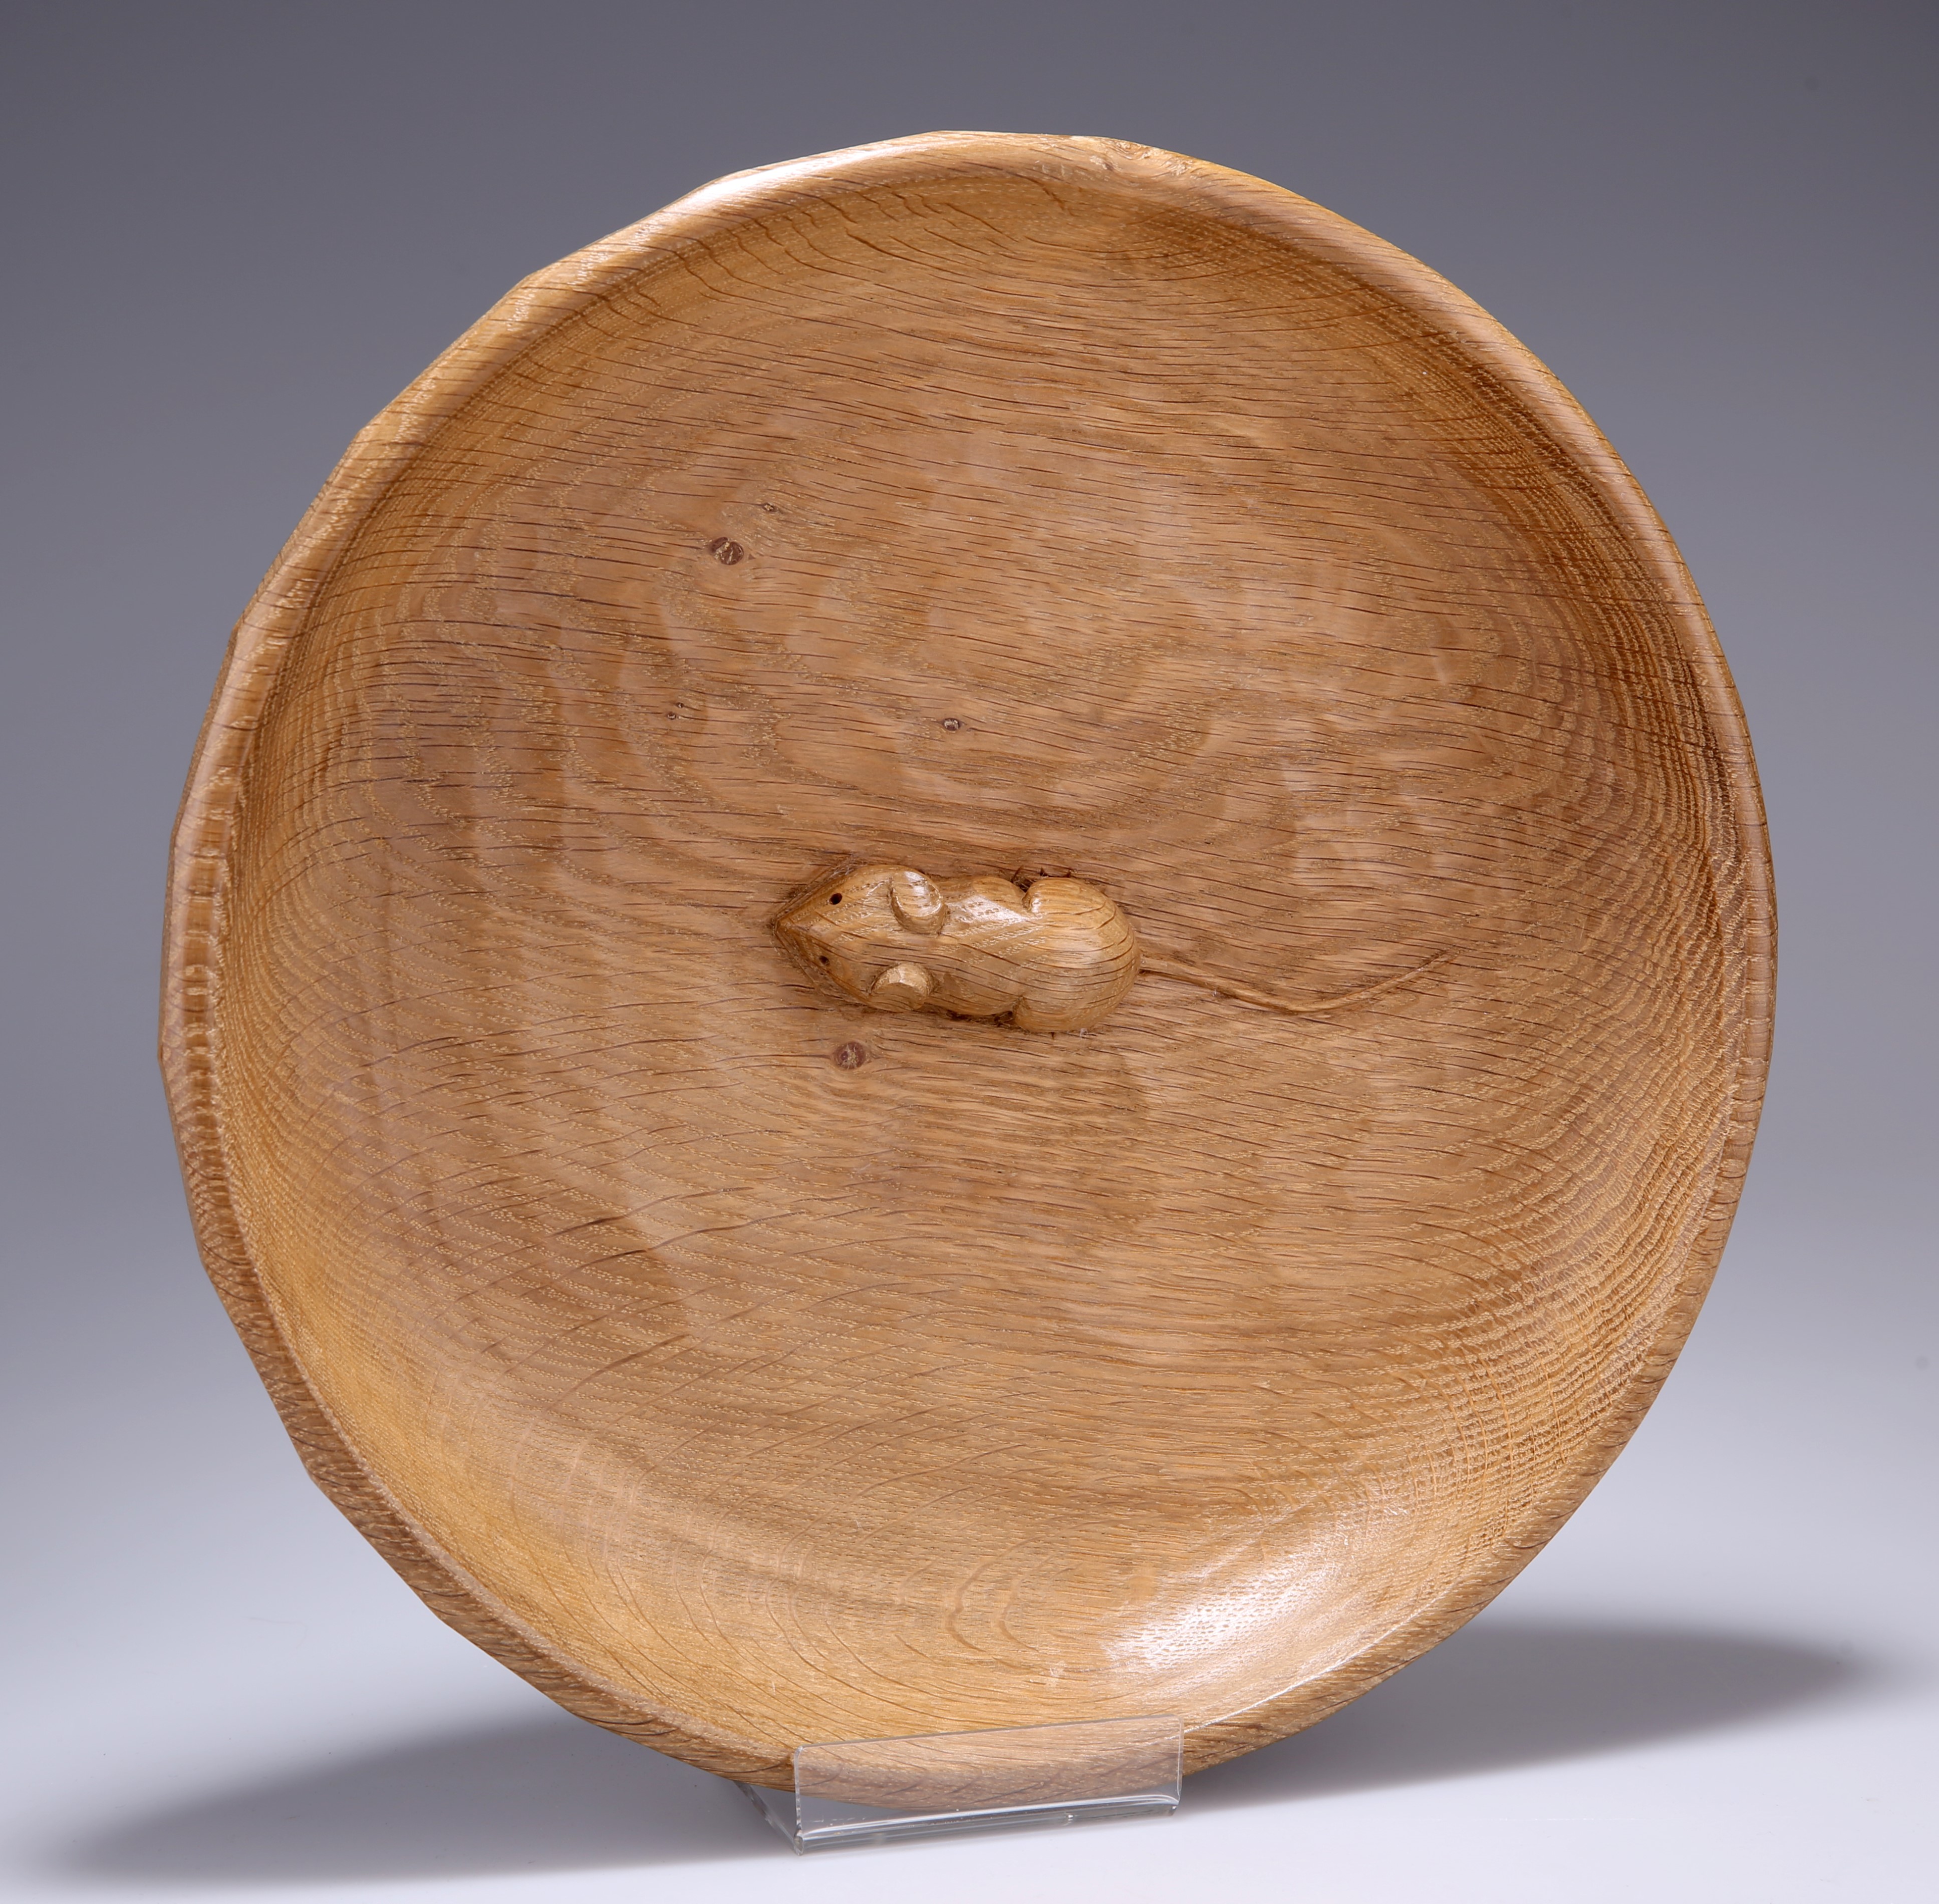 ROBERT THOMPSON OF KILBURN A MOUSEMAN OAK FRUIT BOWL, circular, adzed inside and out, carved mouse - Image 2 of 2